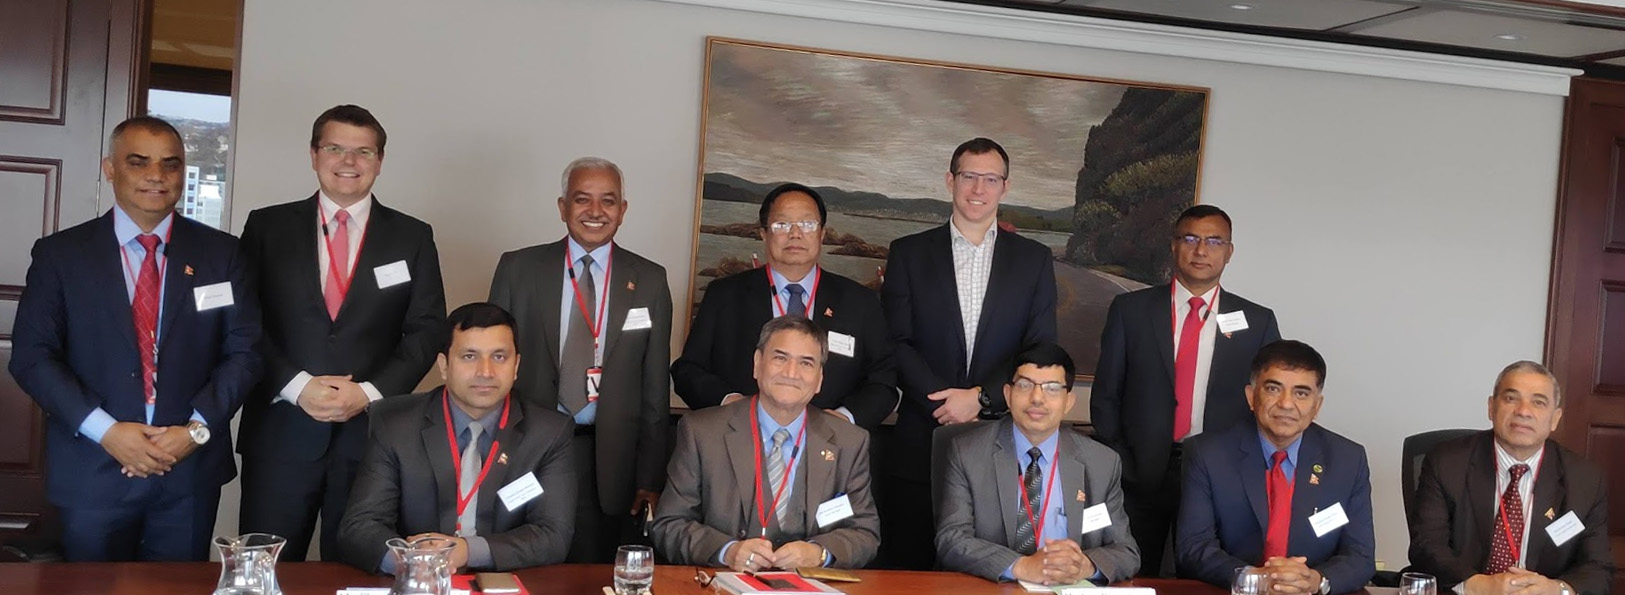 International Training and Study Visit on Banking Business Governance for Board of Directors, 1-3 April 2019, Wellington, New Zealand